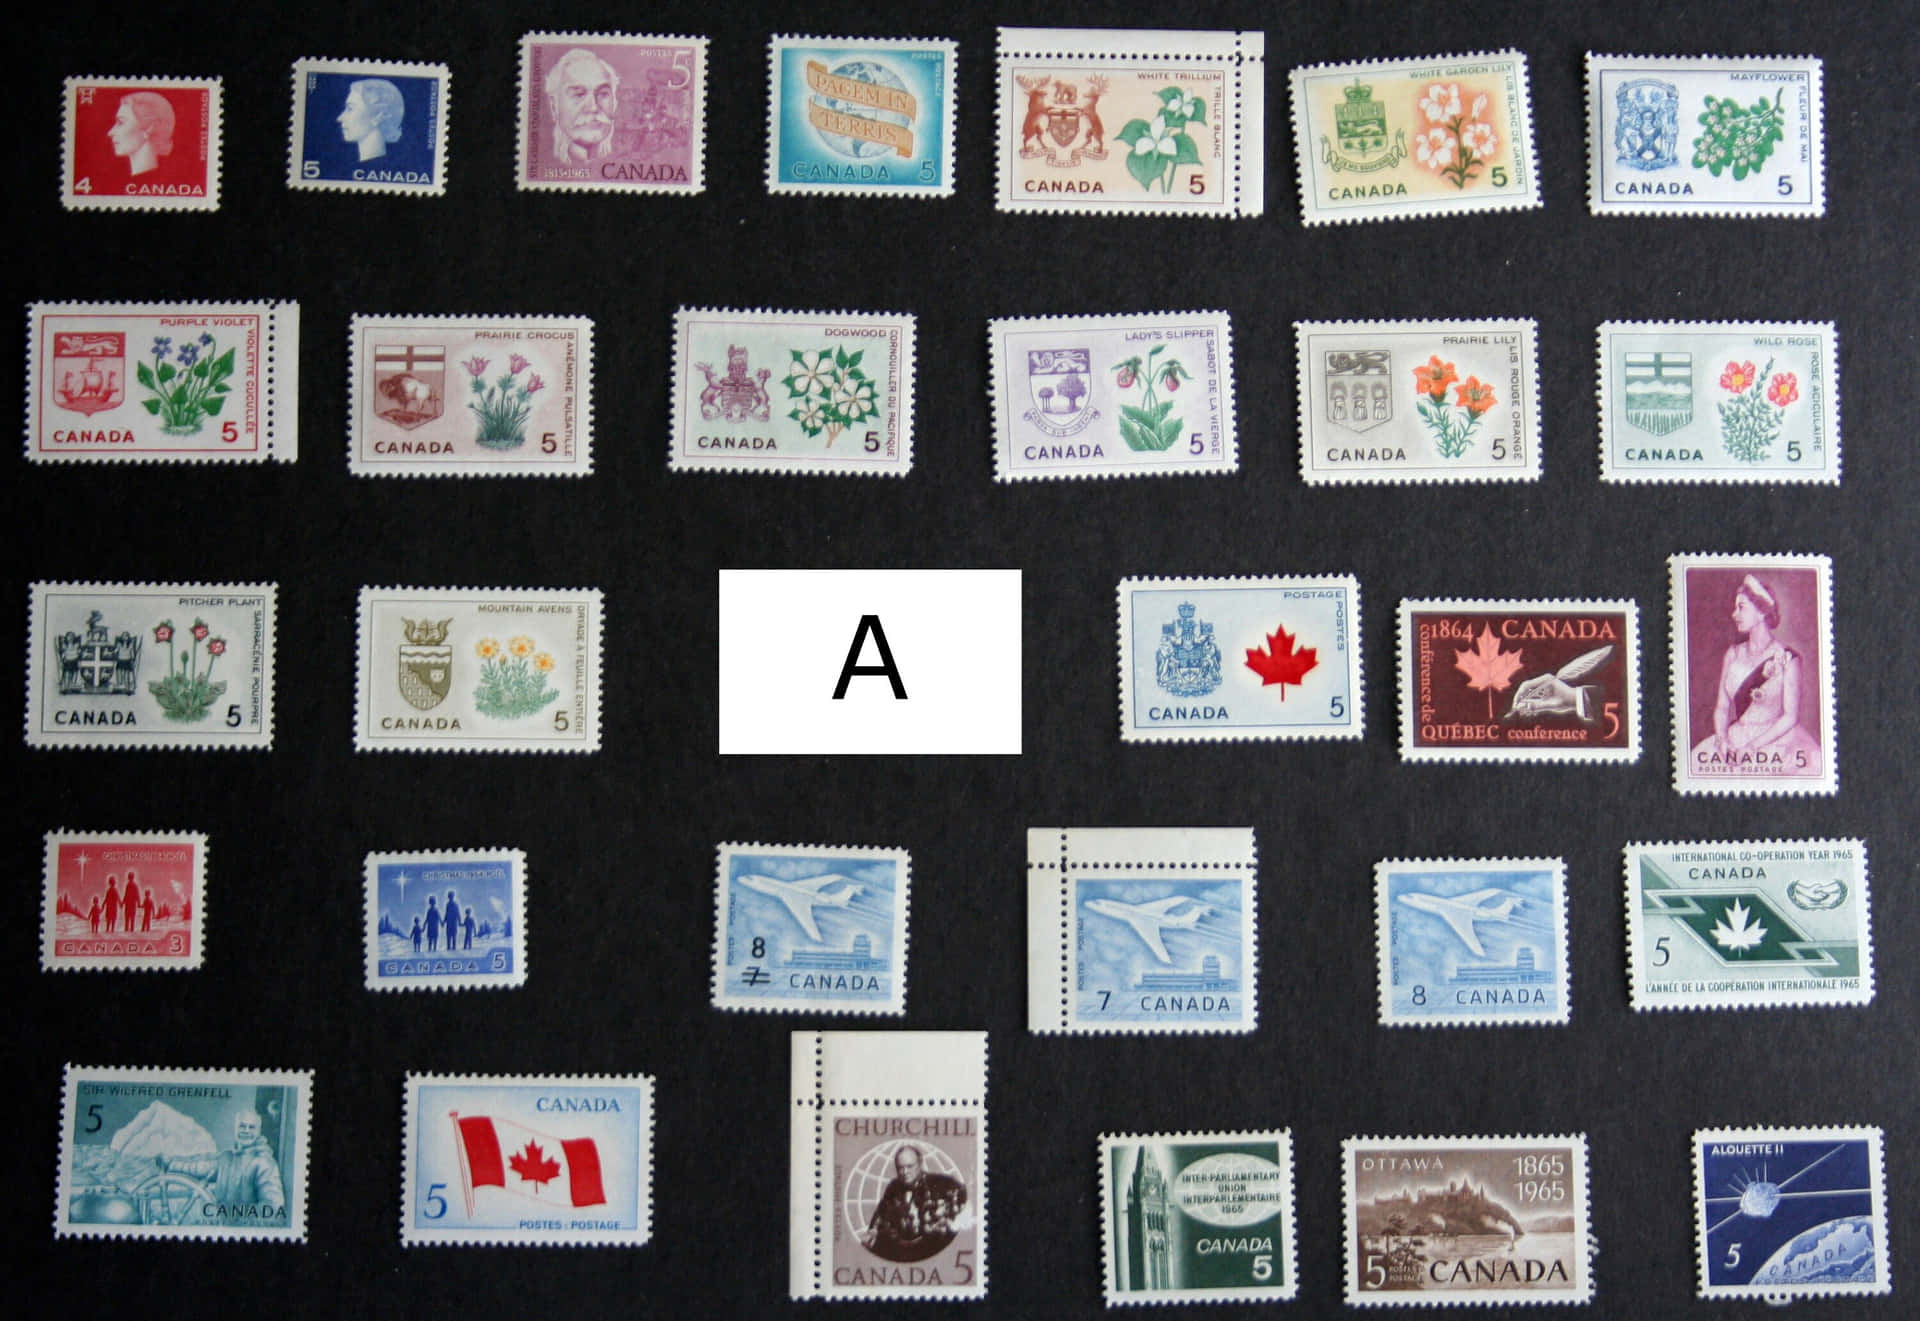 Show off your love for stamps